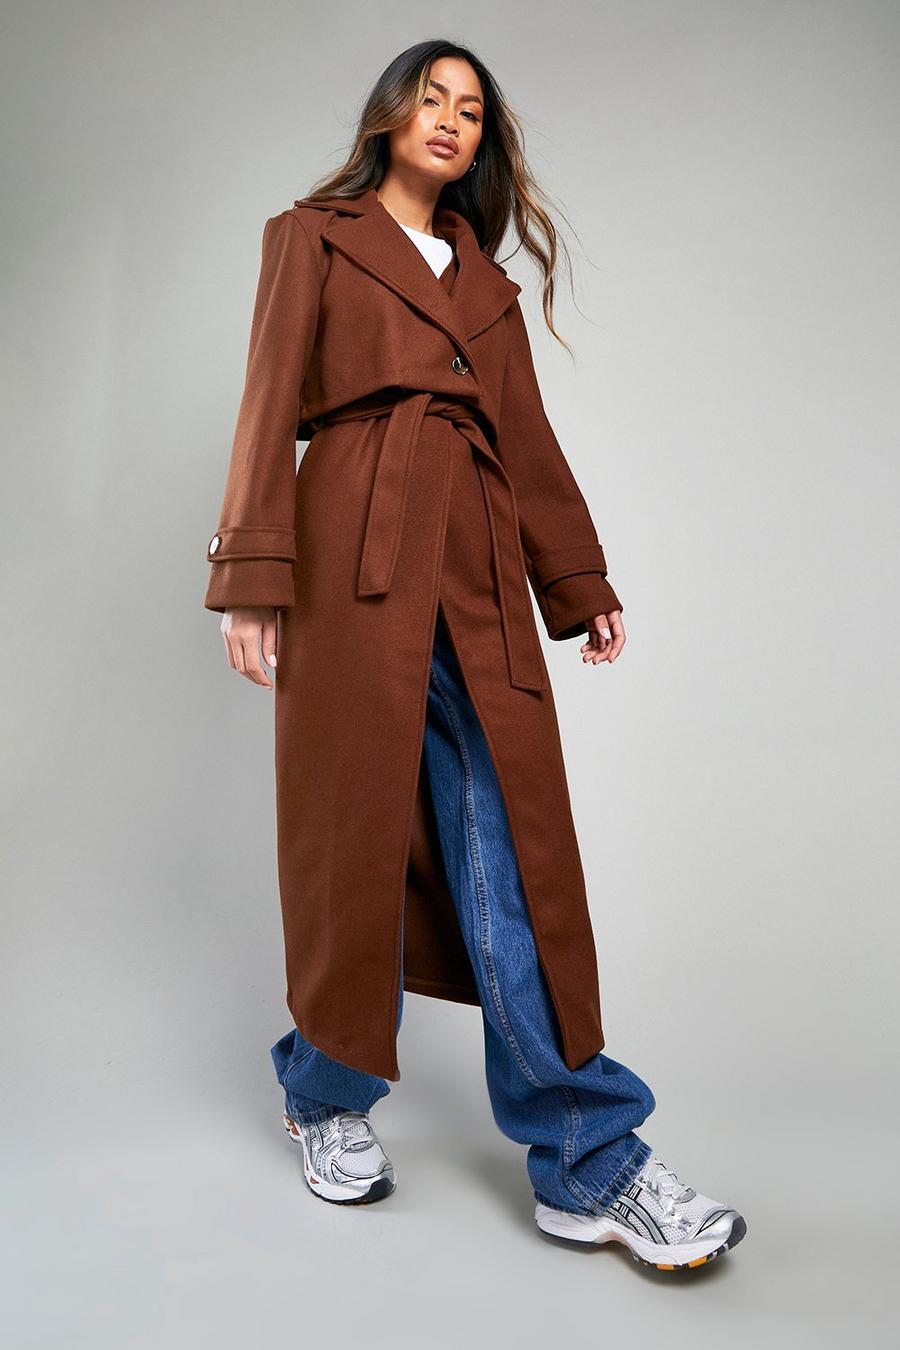 Chocolate brown Wool Look Oversized Trench Coat 